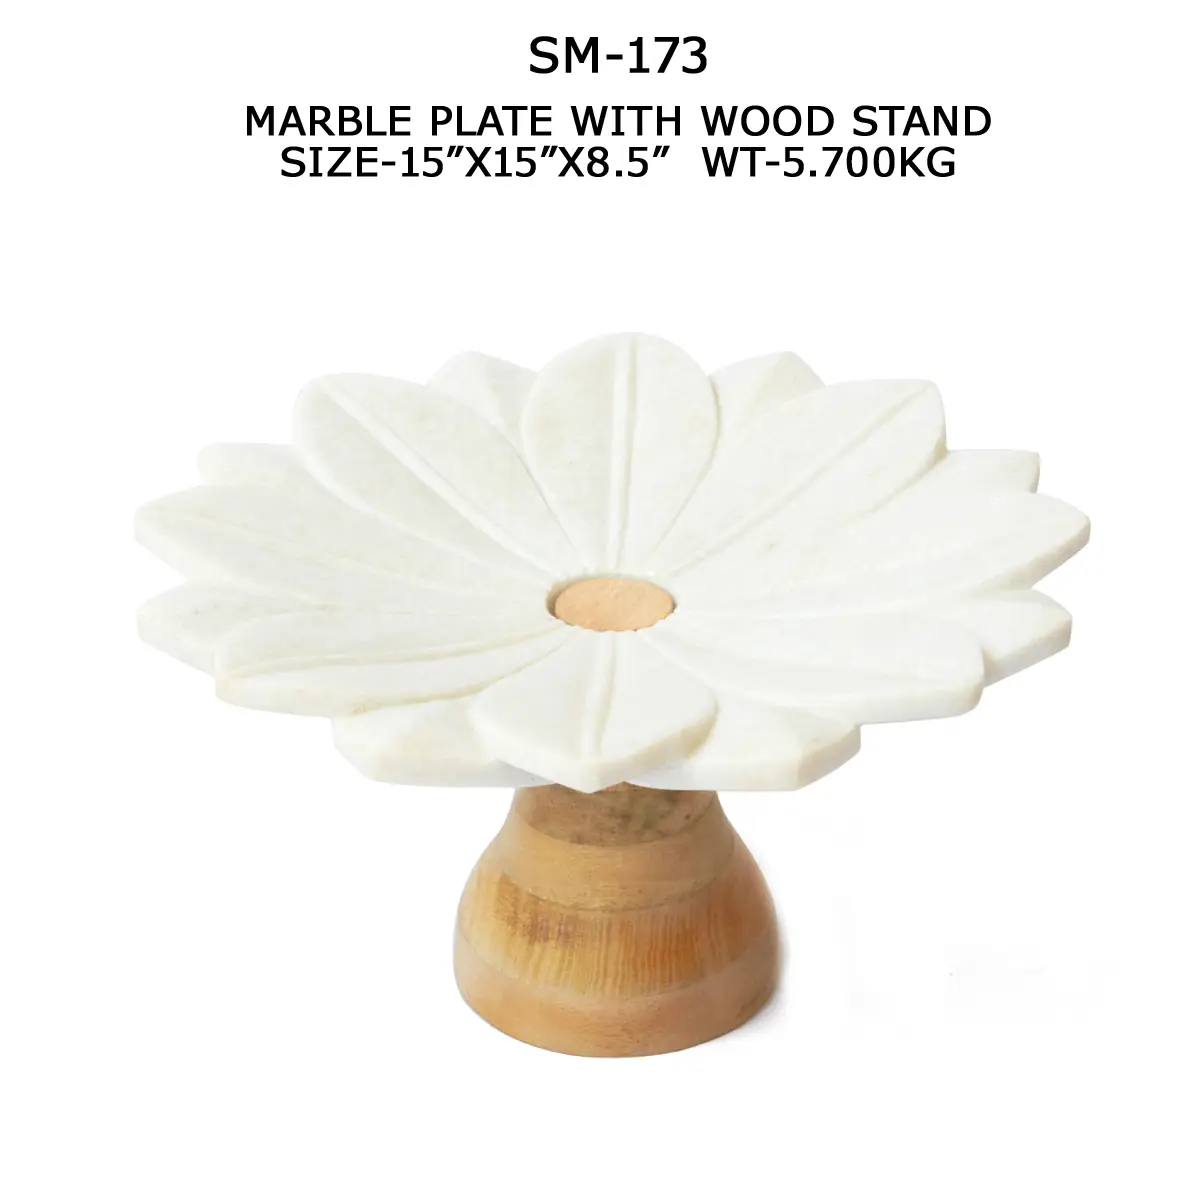 MARBLE PLATE WITH WOOD STAND